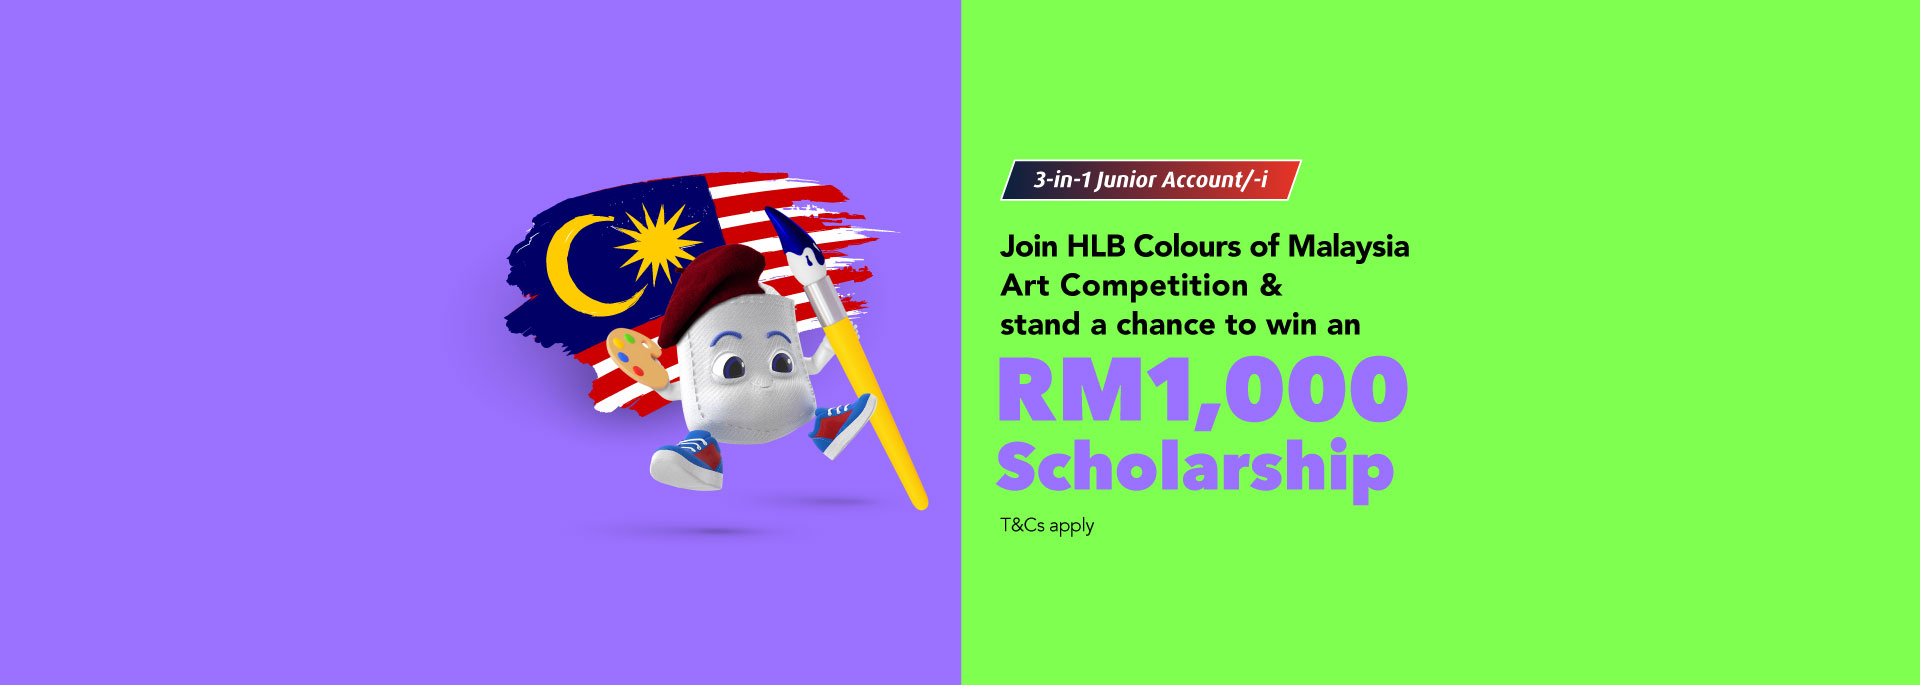 Join HLB Colours of Malaysia Art Competition & stand a chance to win a RM1,000 Scholarship